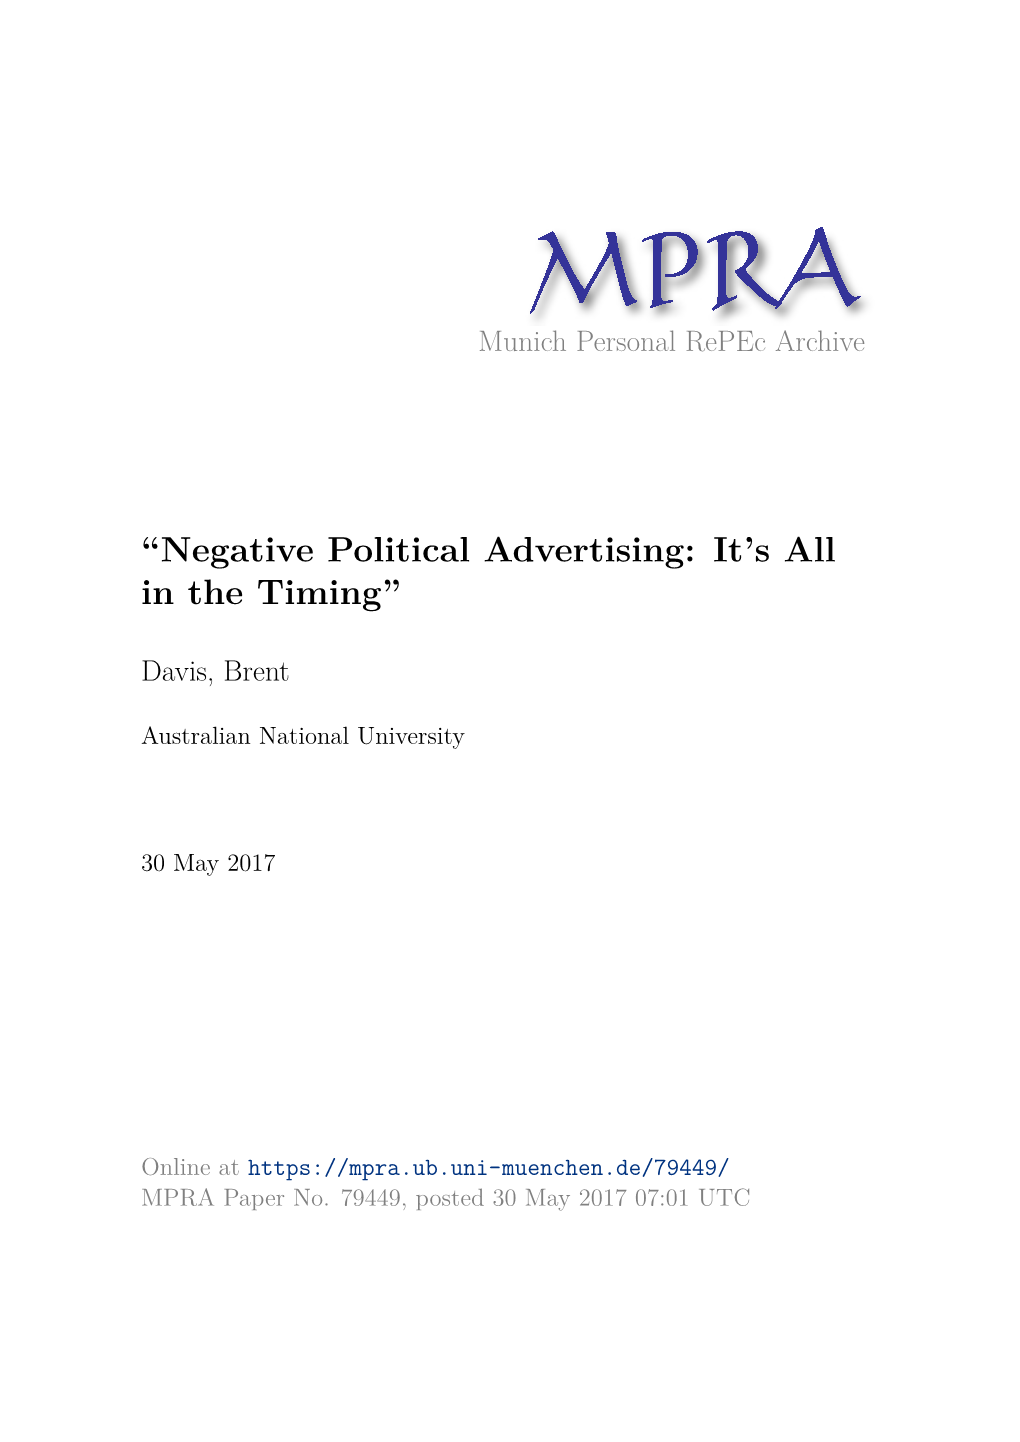 “Negative Political Advertising: It's All in the Timing”